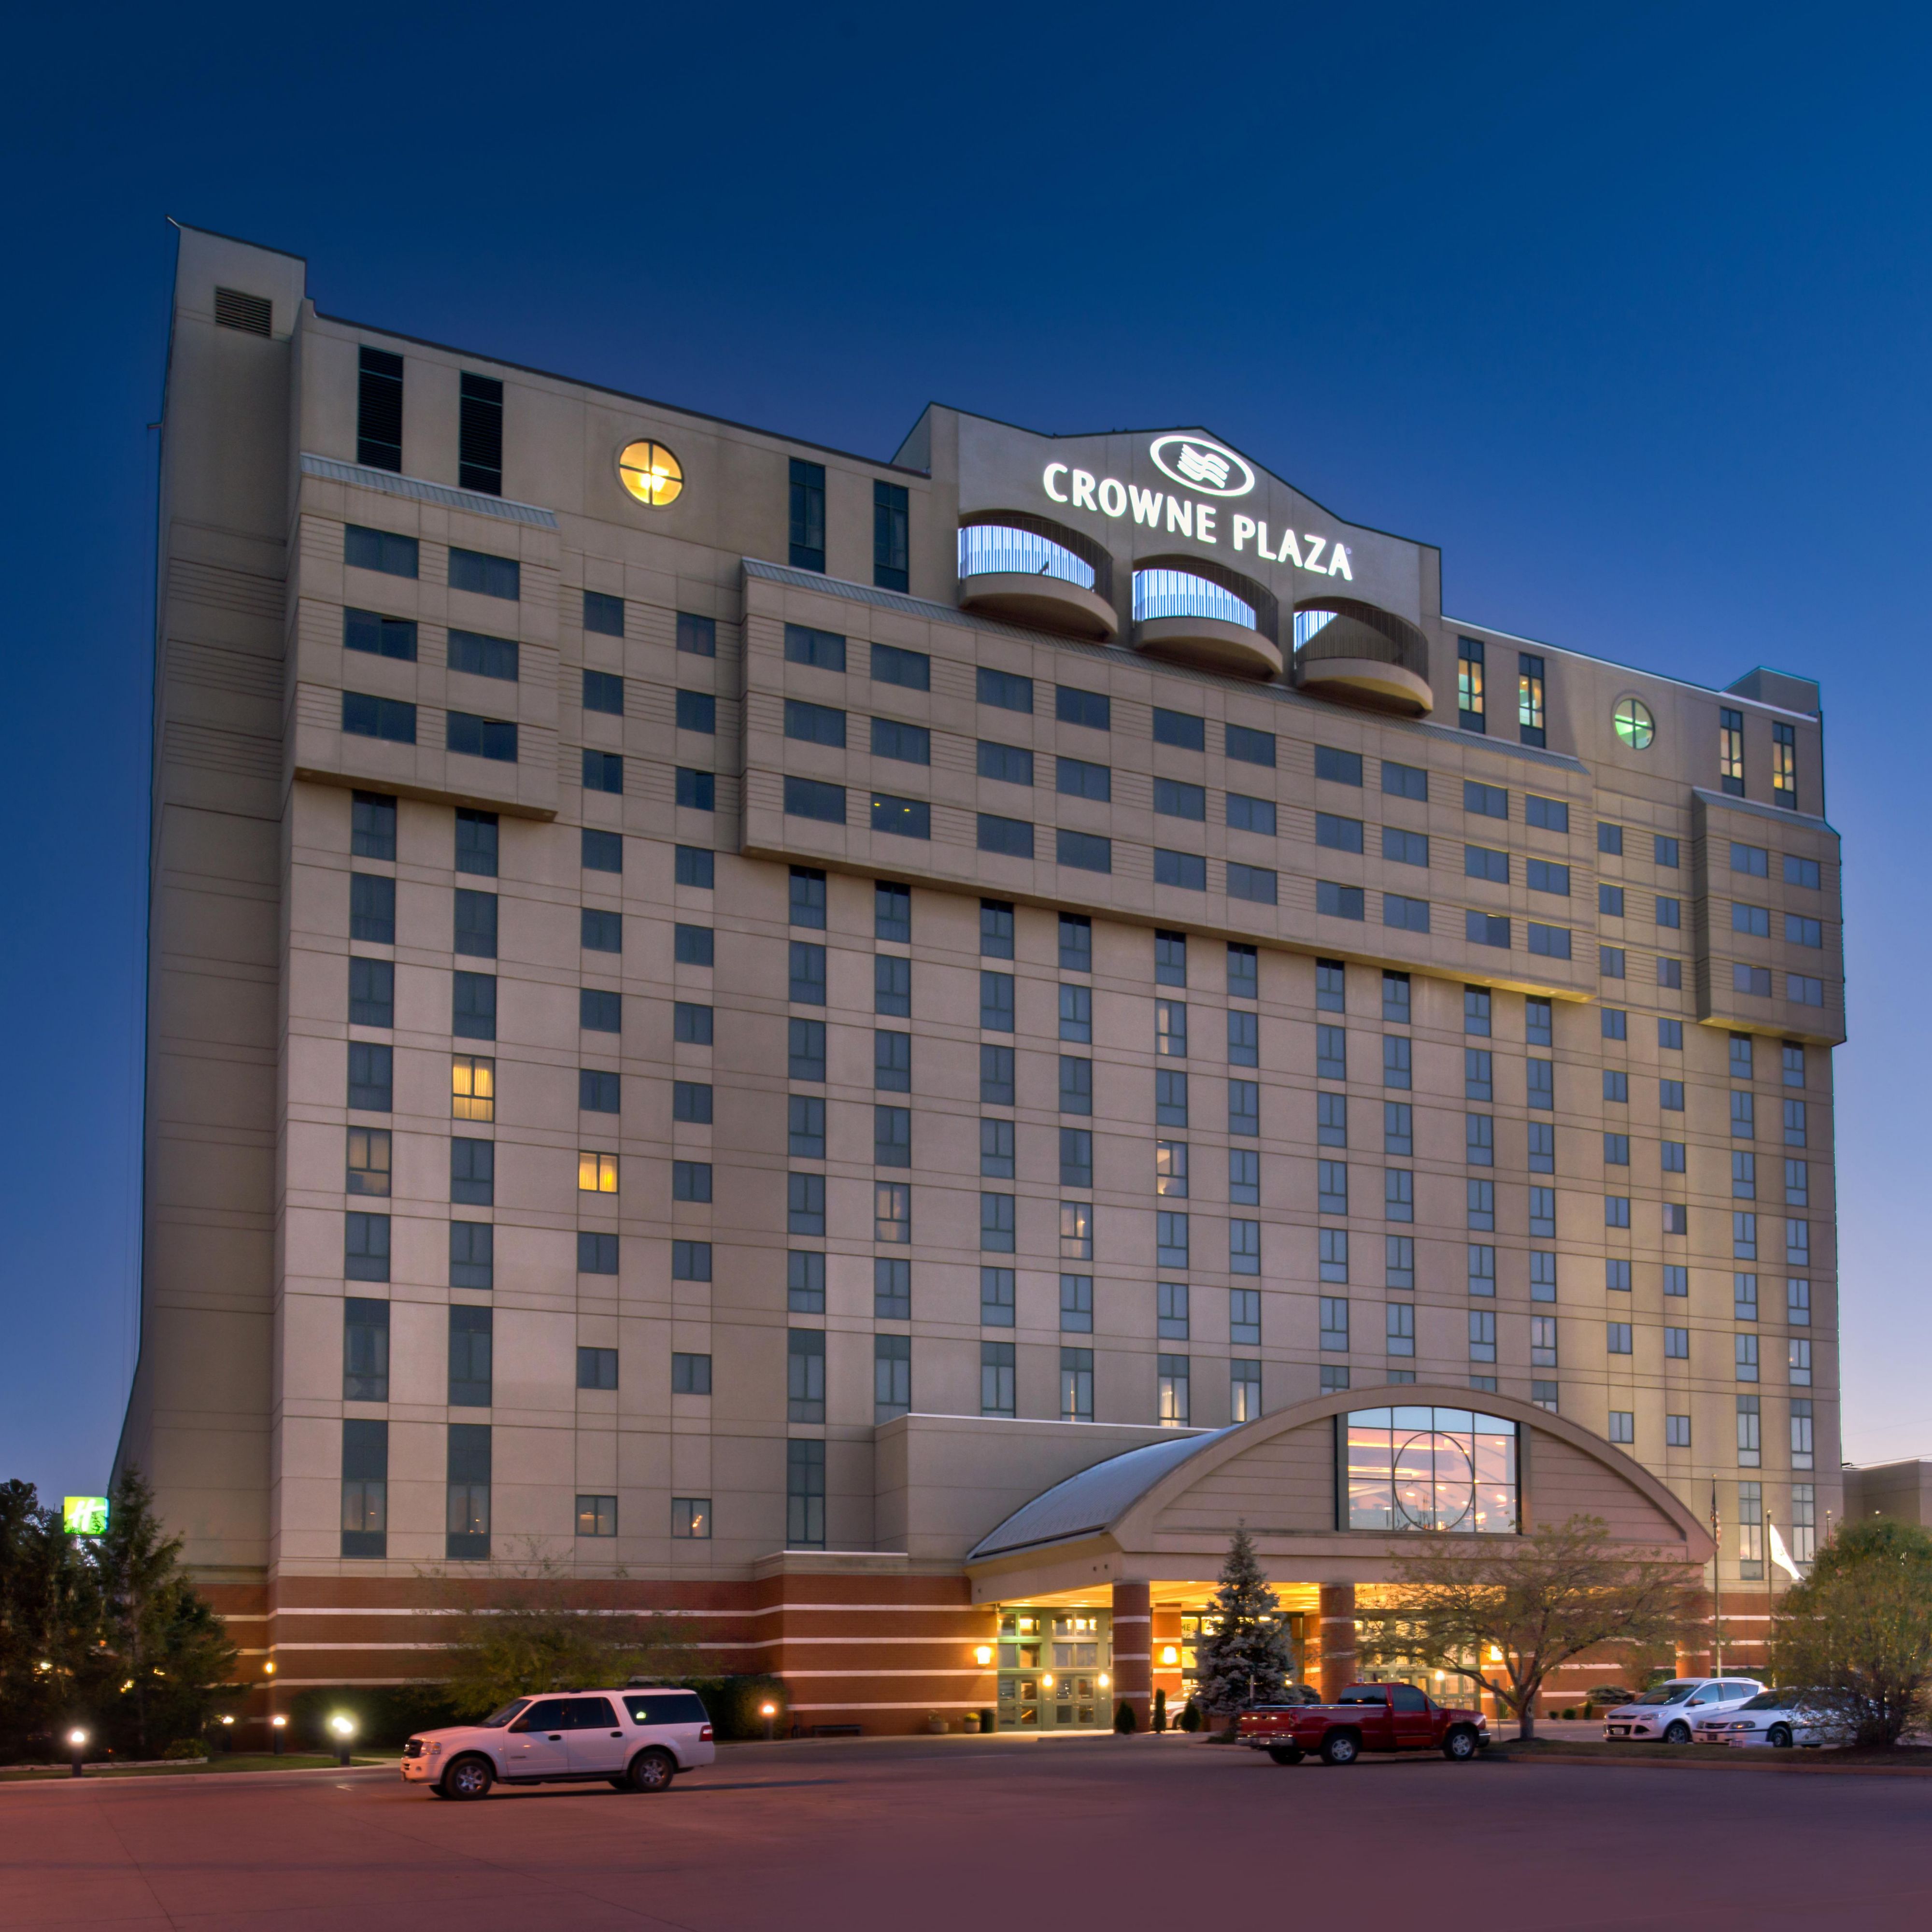 Crowne Plaza is located within minutes of Knight&#39;s Action Park.